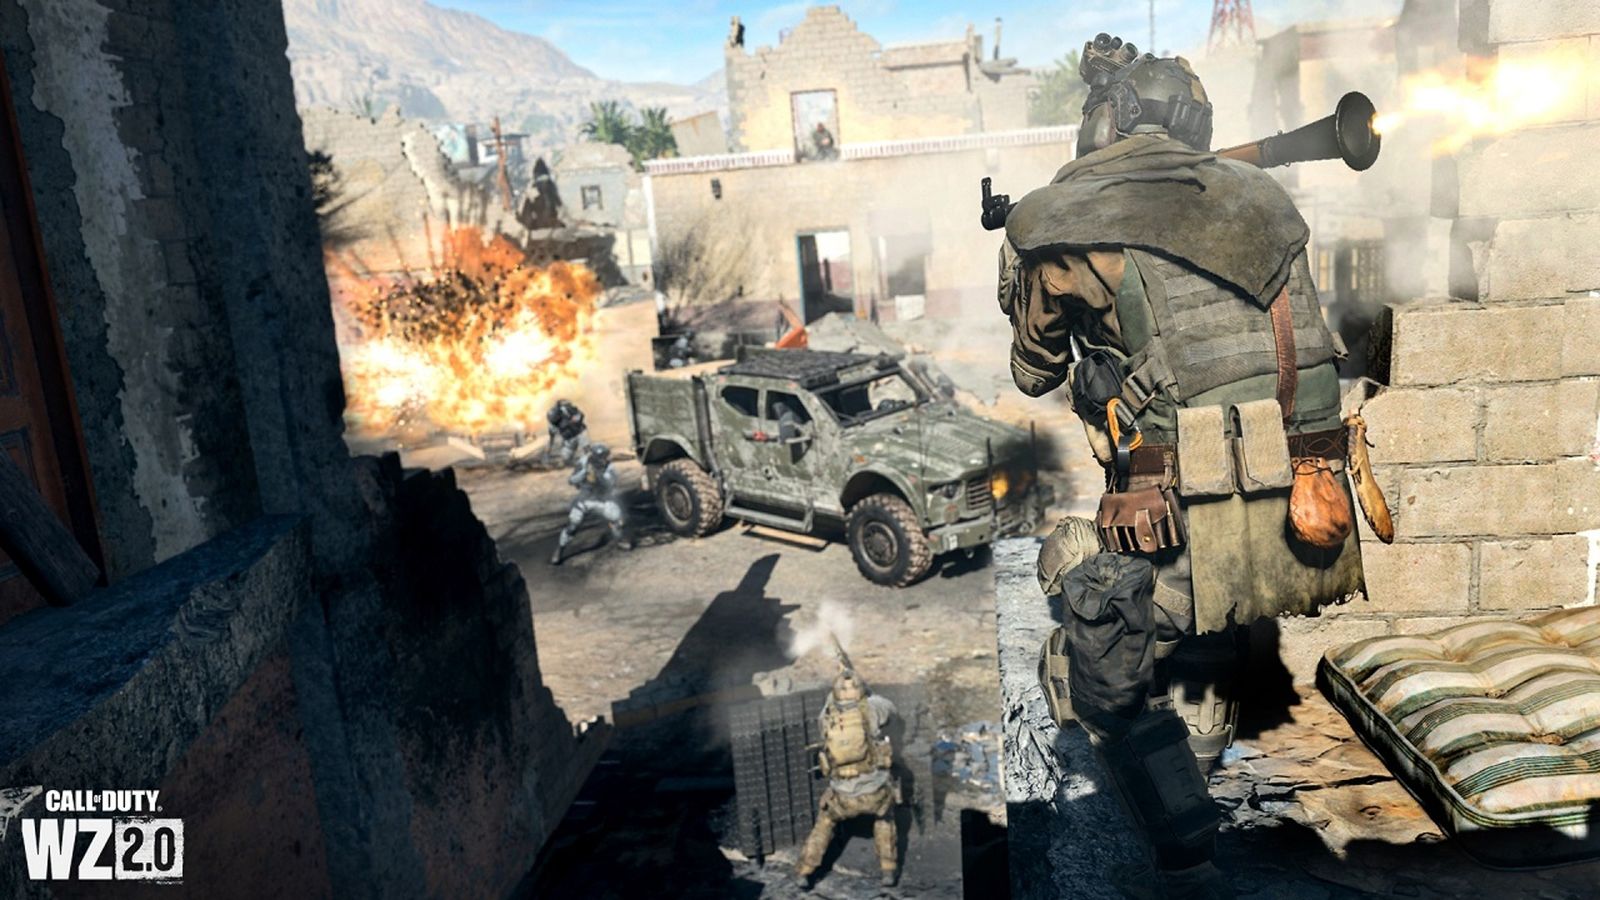 Screenshot of Warzone 2 player firing rocket launcher at a nearby vehicle